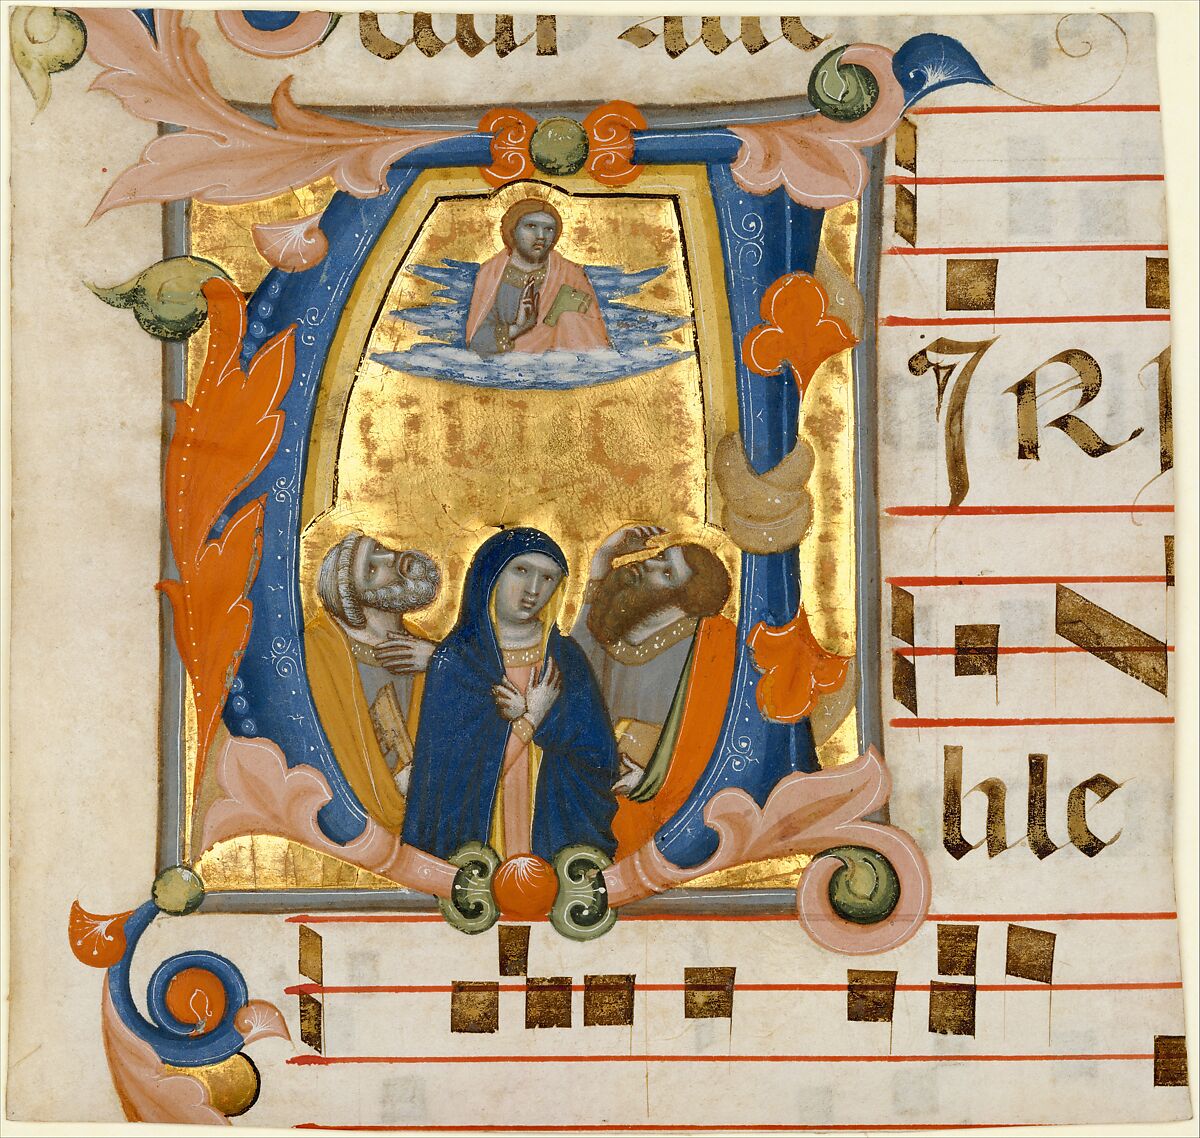 Ascension in an Initial V, Niccolò di ser Sozzo (Italian, Siena, active ca. 1334, died 1363), Tempera and gold on parchment 